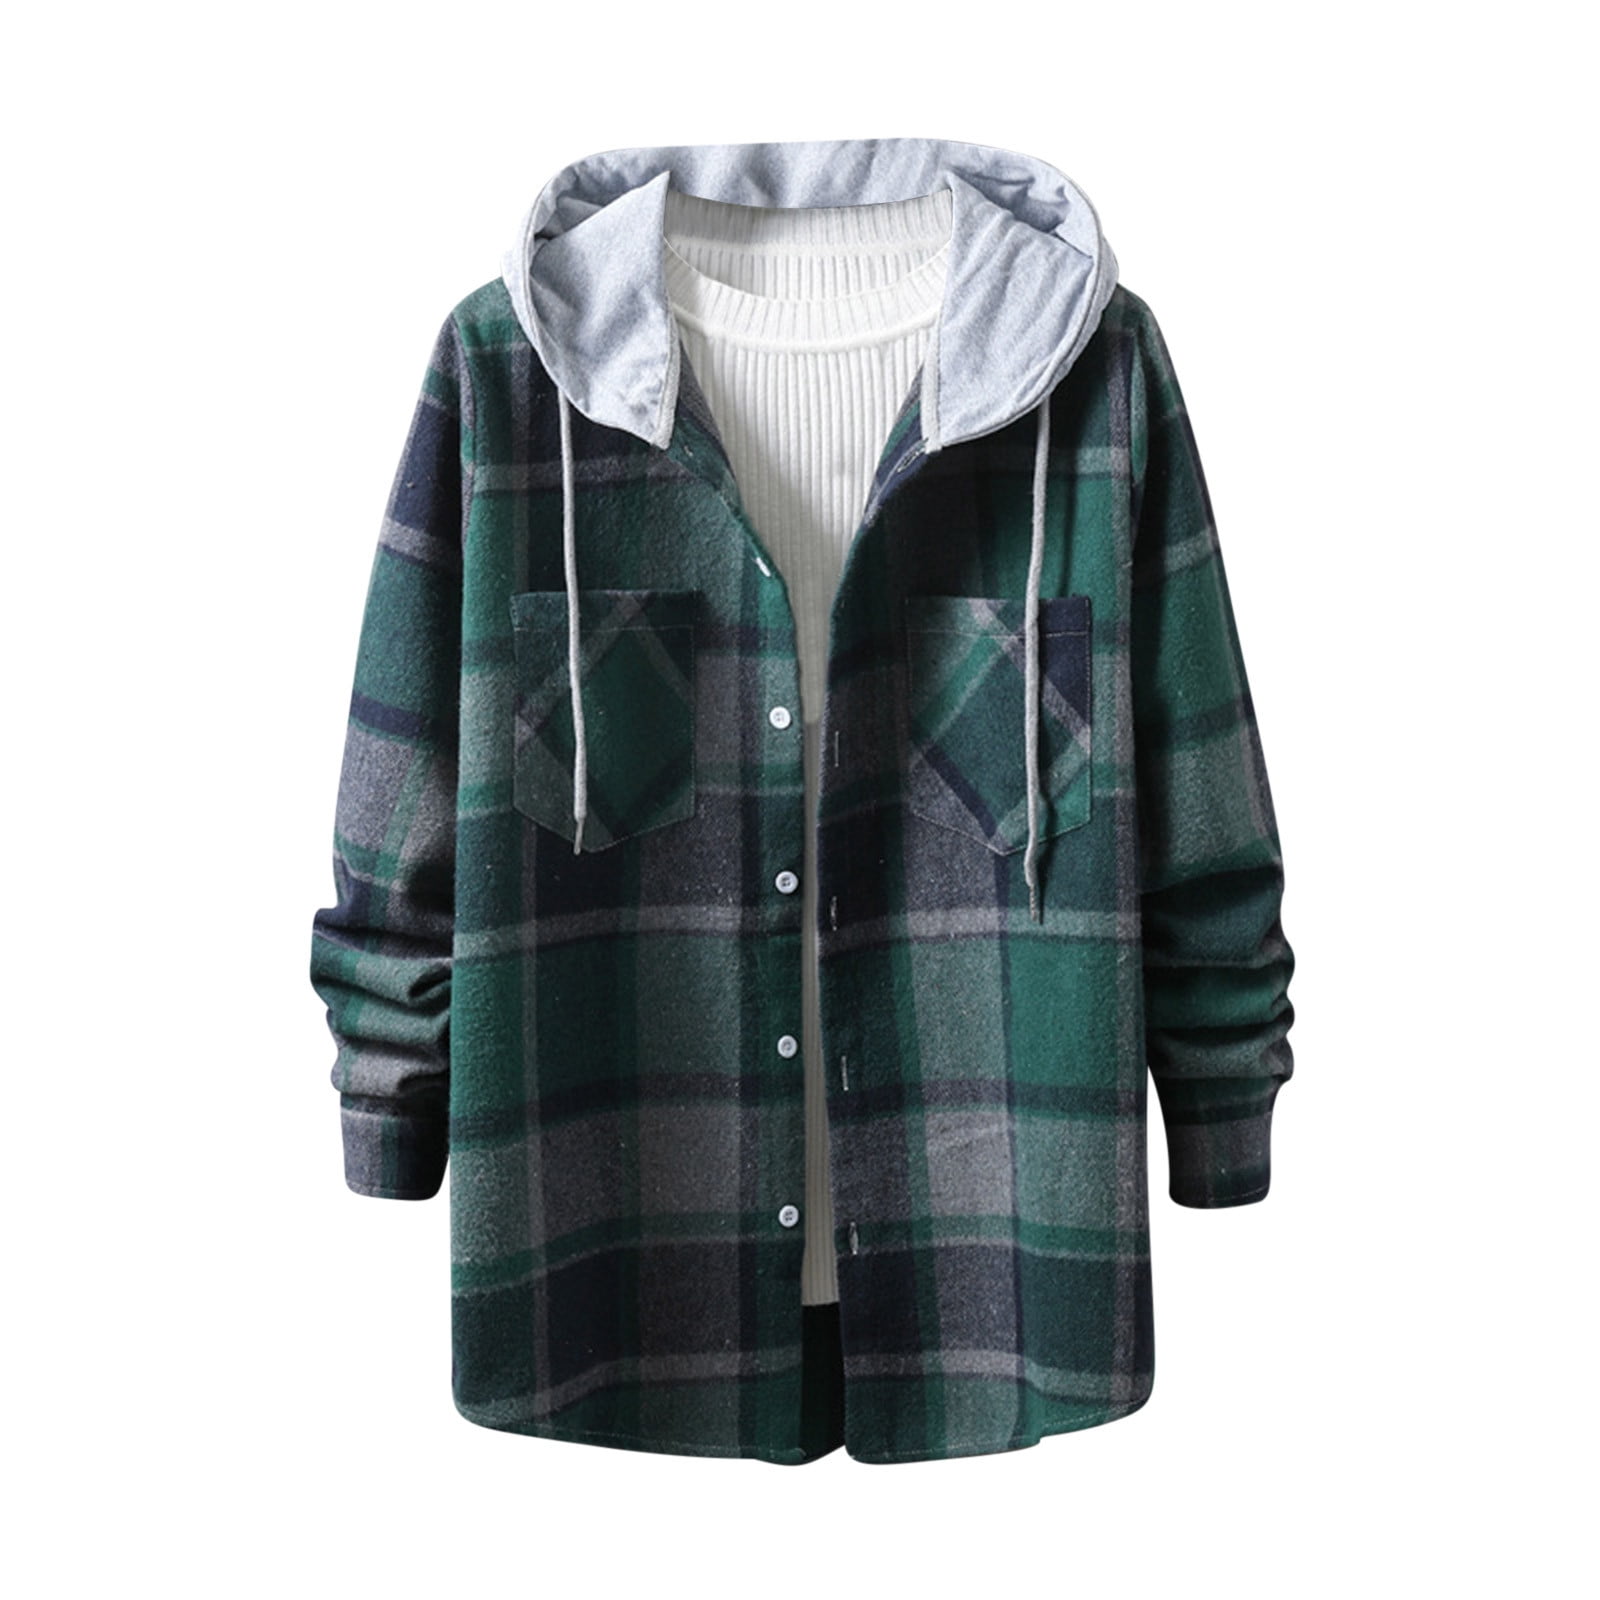 VSSSJ Men's New Casual Fashion Plaid Jackets Loose Fit Youth Long ...